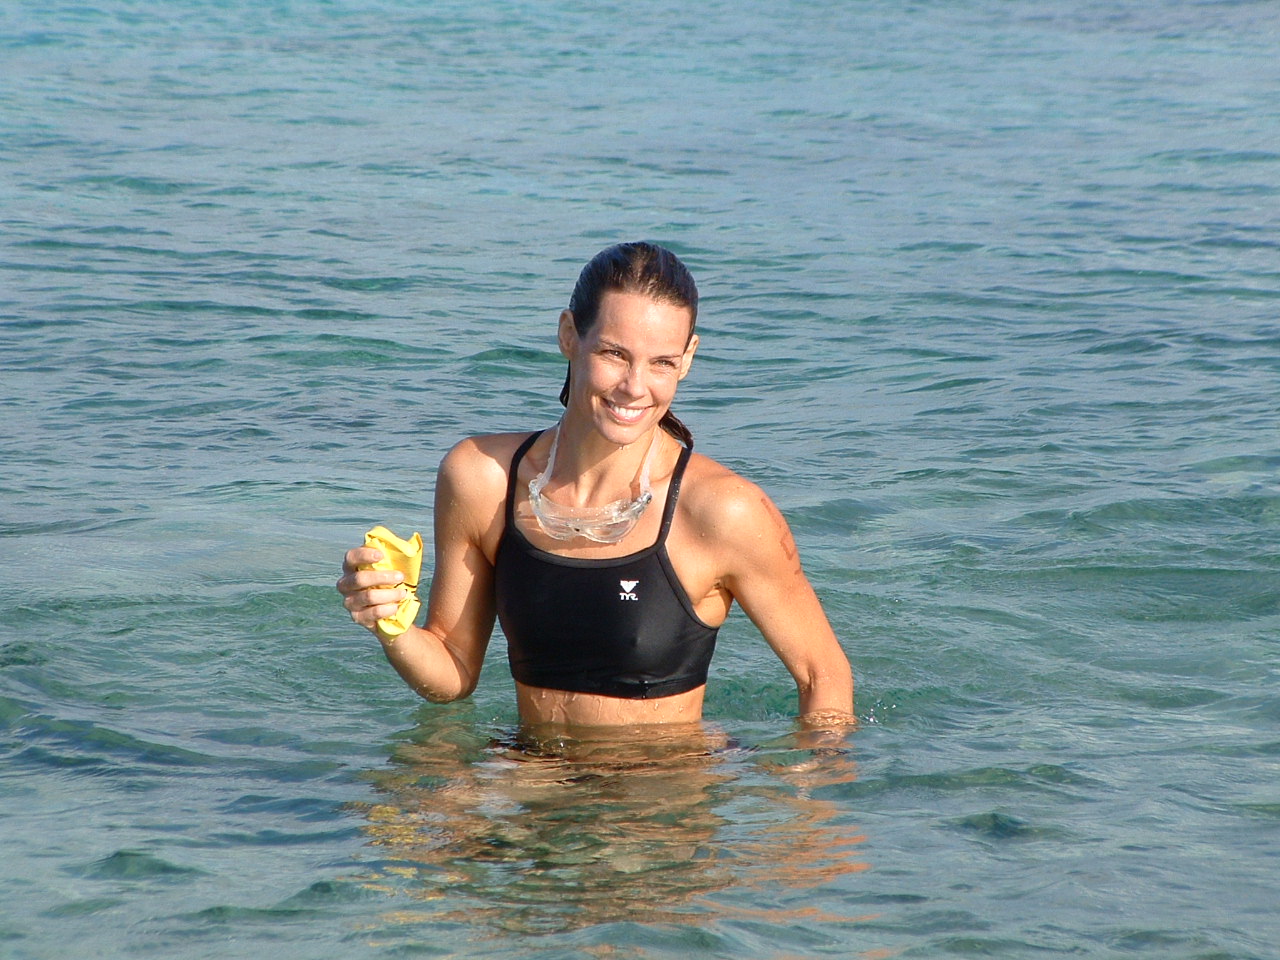 Alexandra finishes a 6.2 mile ocean race off the island of Bonaire, 2004